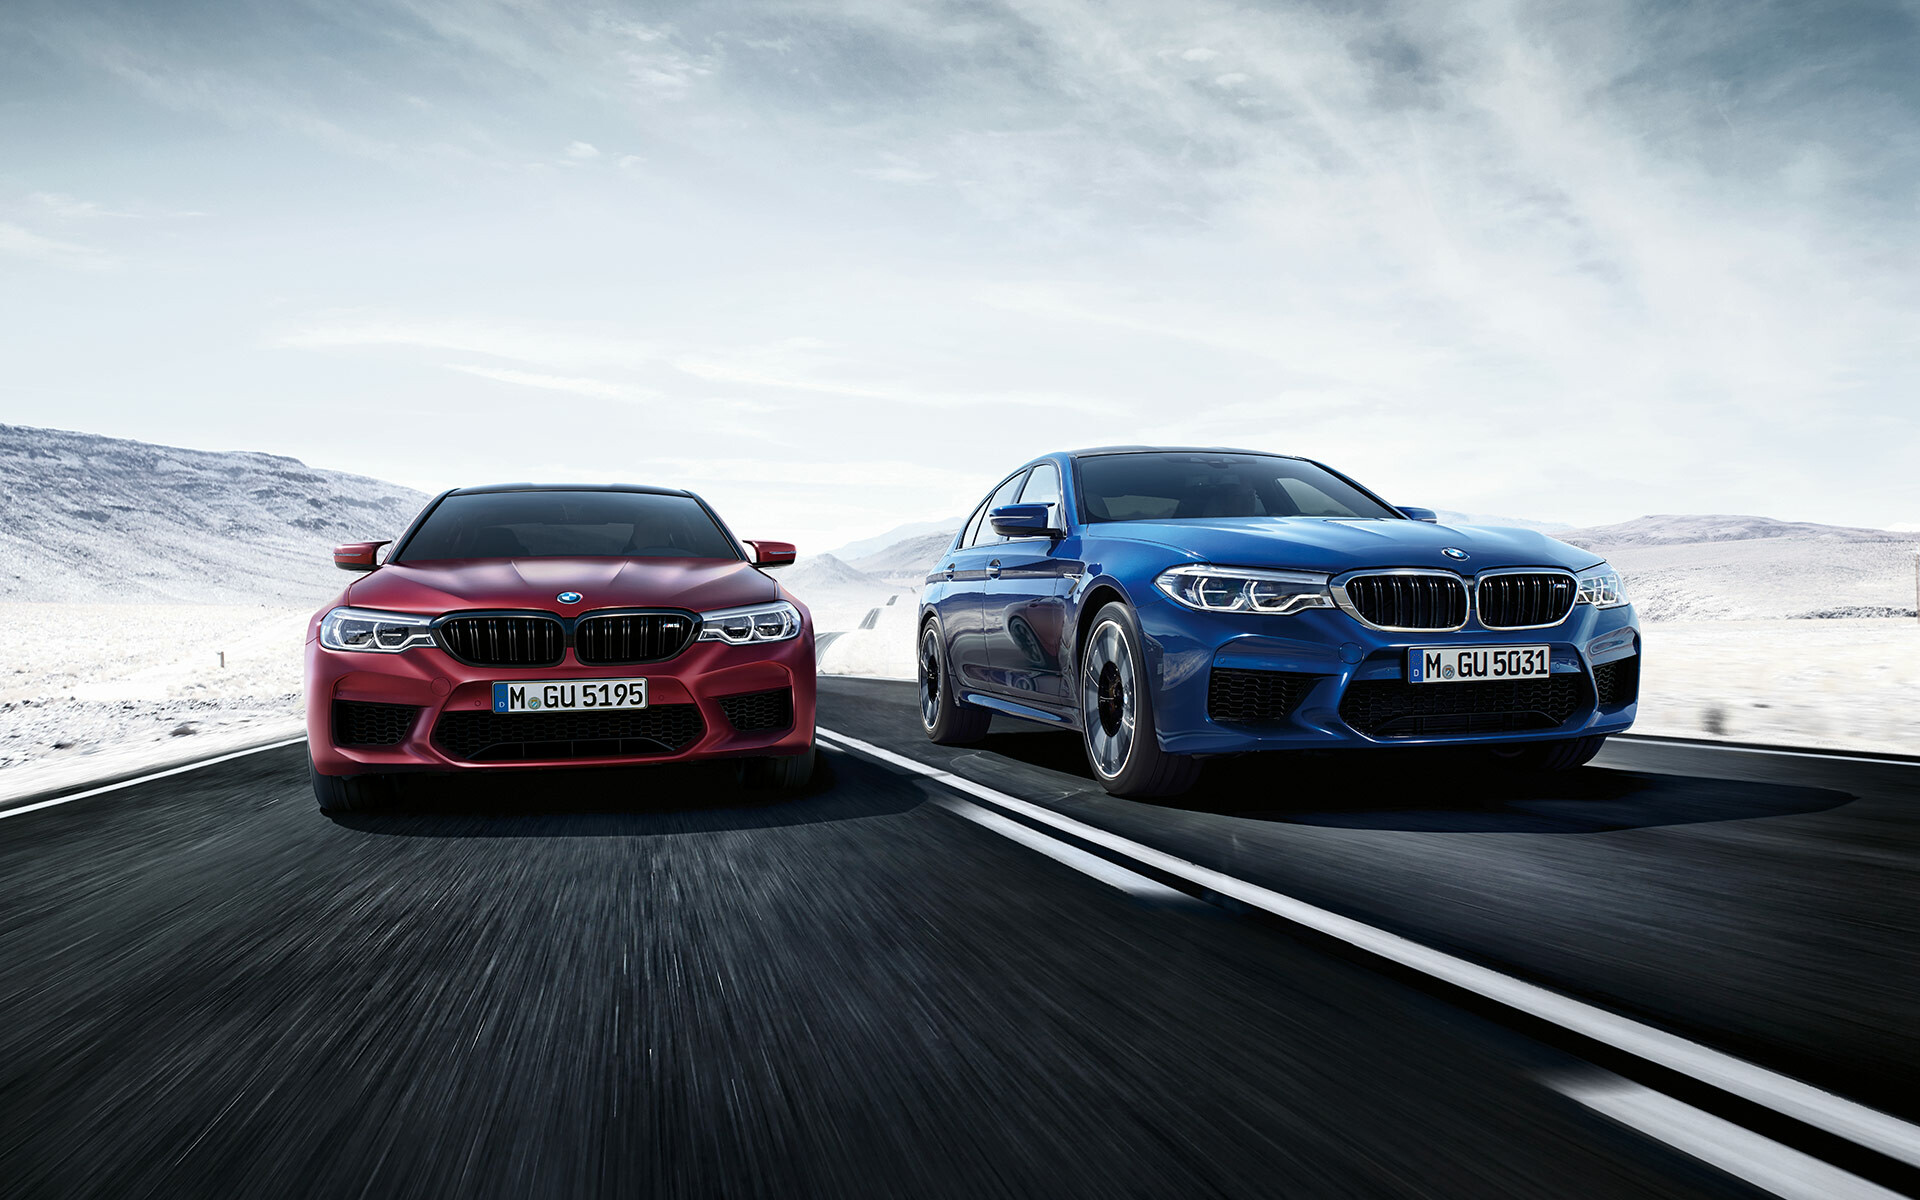 BMW: A German company that produces cars, M5, A high performance variant of the BMW 5 Series. 1920x1200 HD Wallpaper.